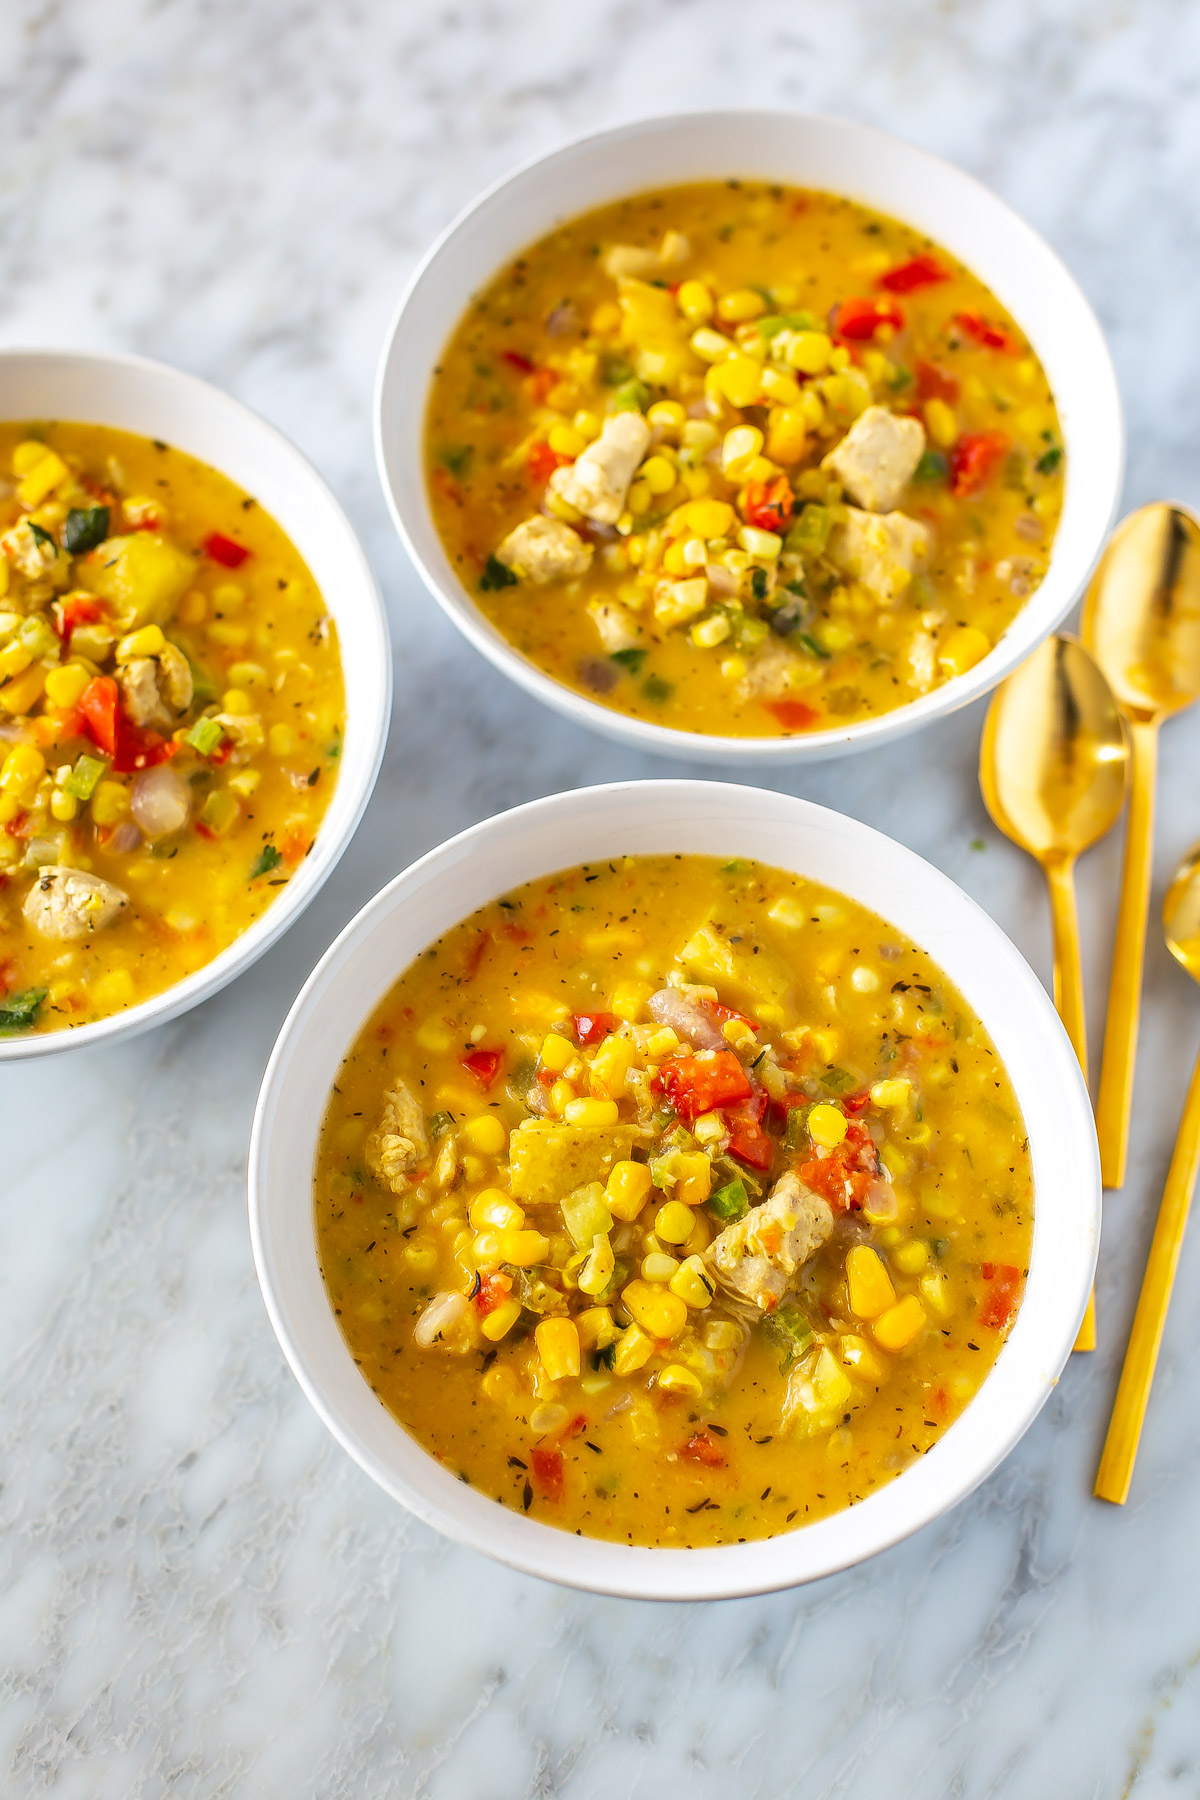 Three bowls of chicken corn chowder with three gold spoons placed next to them.